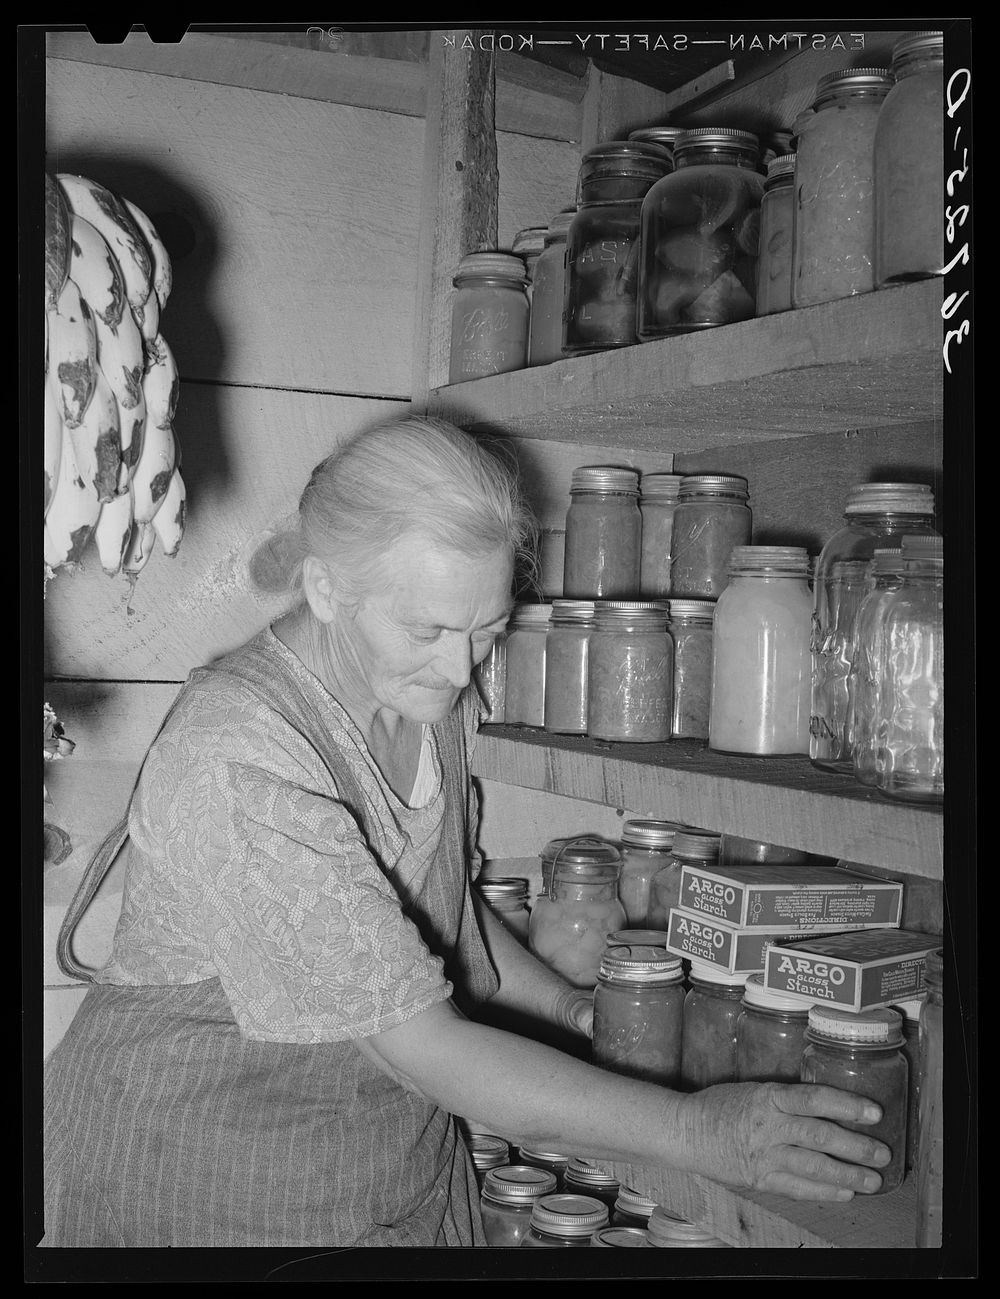 Mrs. Hutton in her storage cellar. Mrs. Hutton said, "You know it seems like a farm is the place for us old folks. In town…